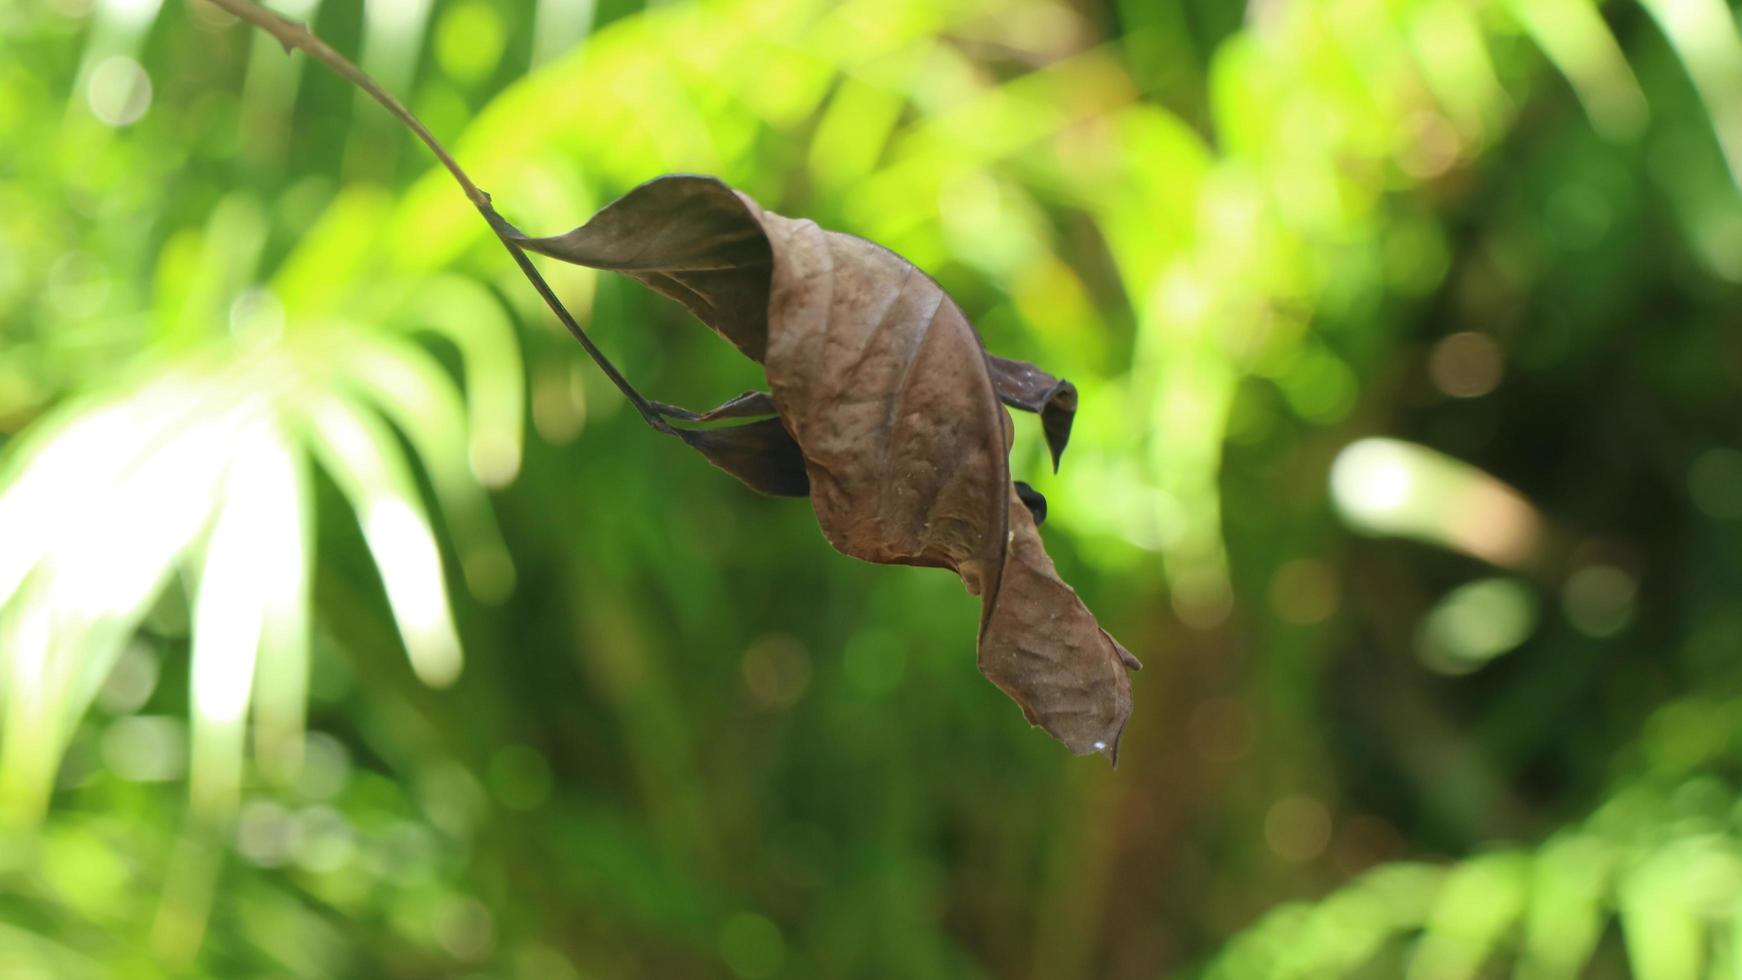 dry leaf with bokeh background photo